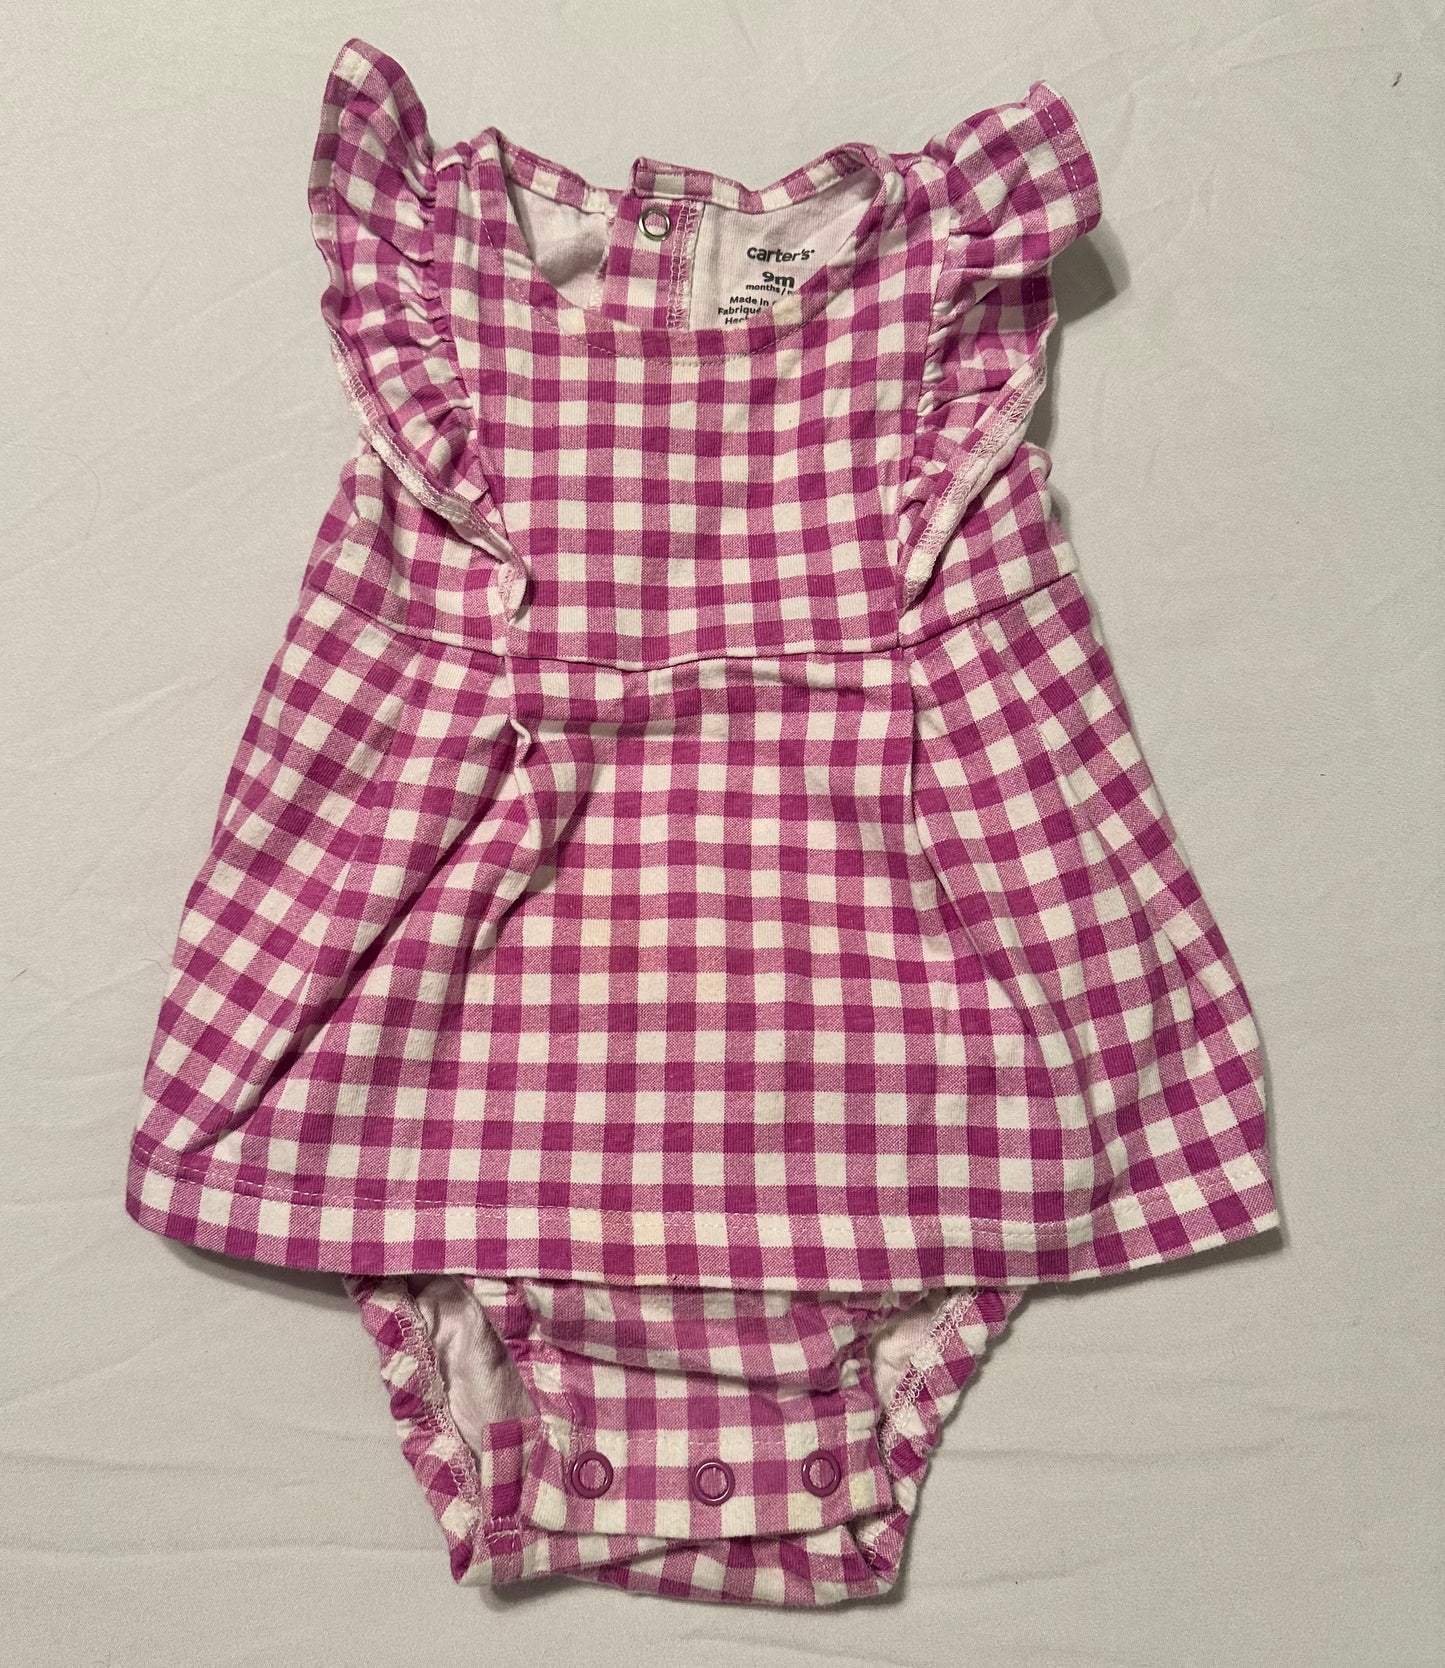 Girls purple gingham bodysuit with dress, Carter’s 6 months